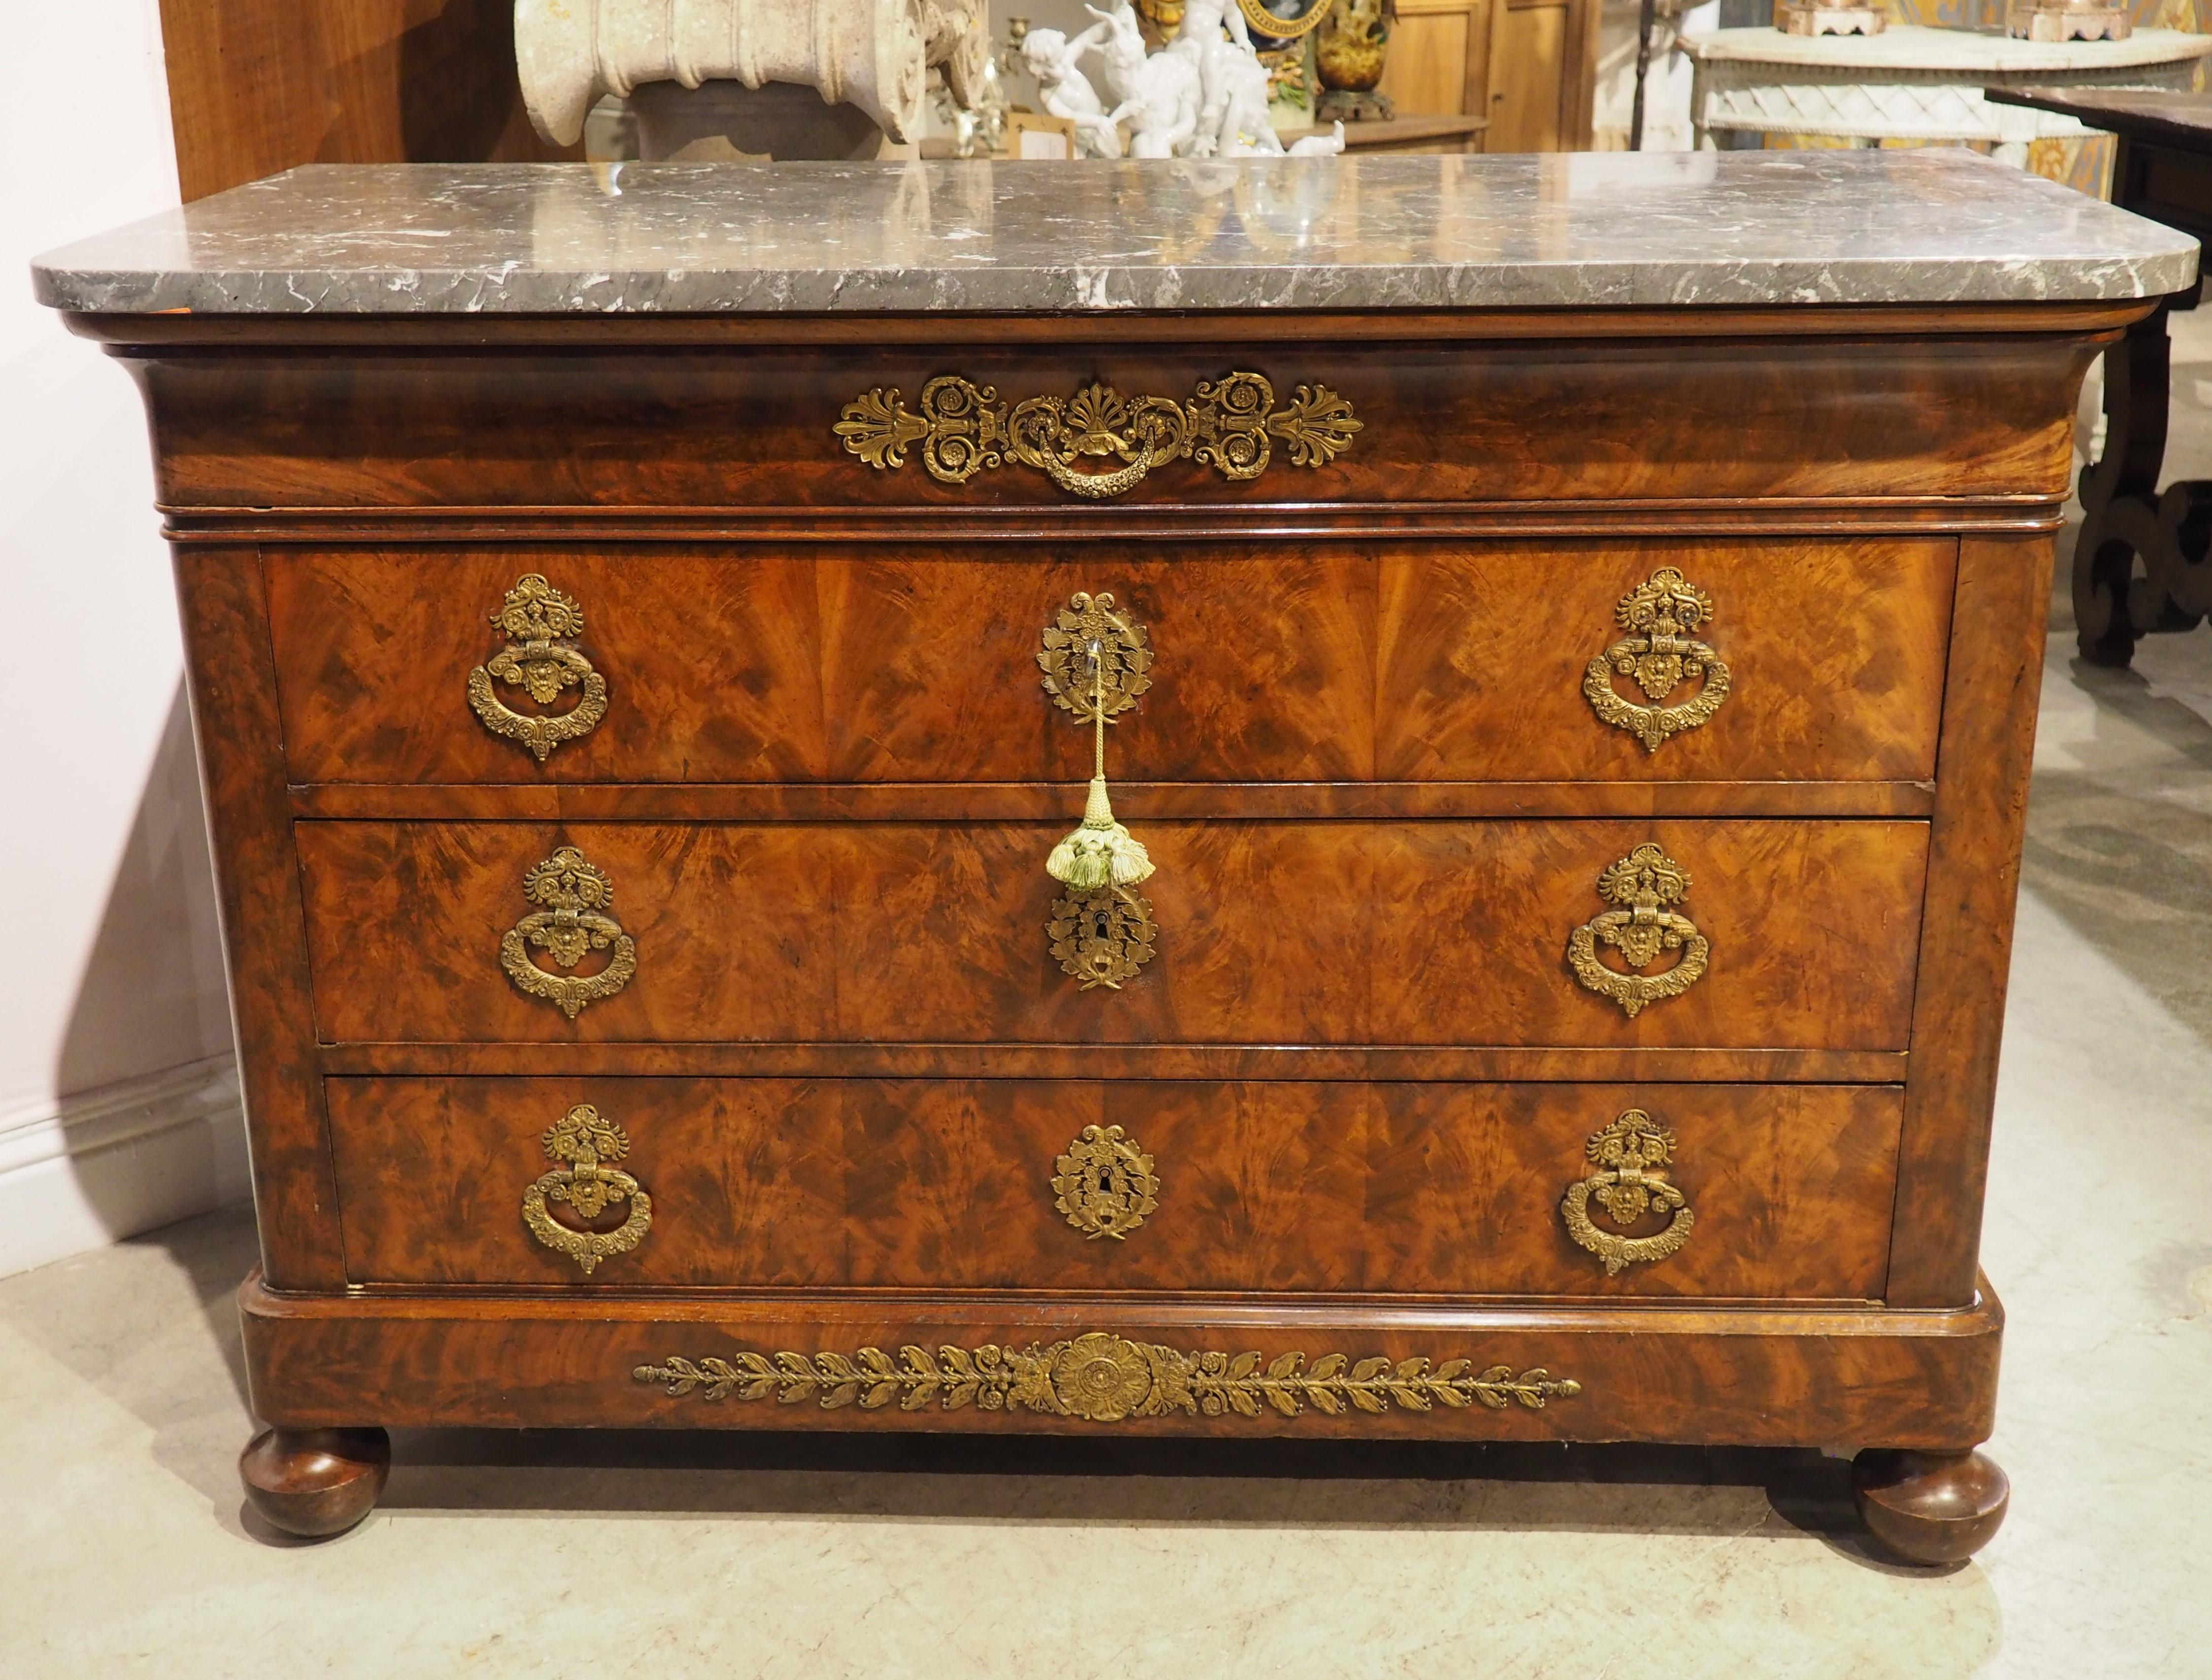 Circa 1820 French Restauration Commode in Flame Mahogany, Gilt Bronze Hardware For Sale 9